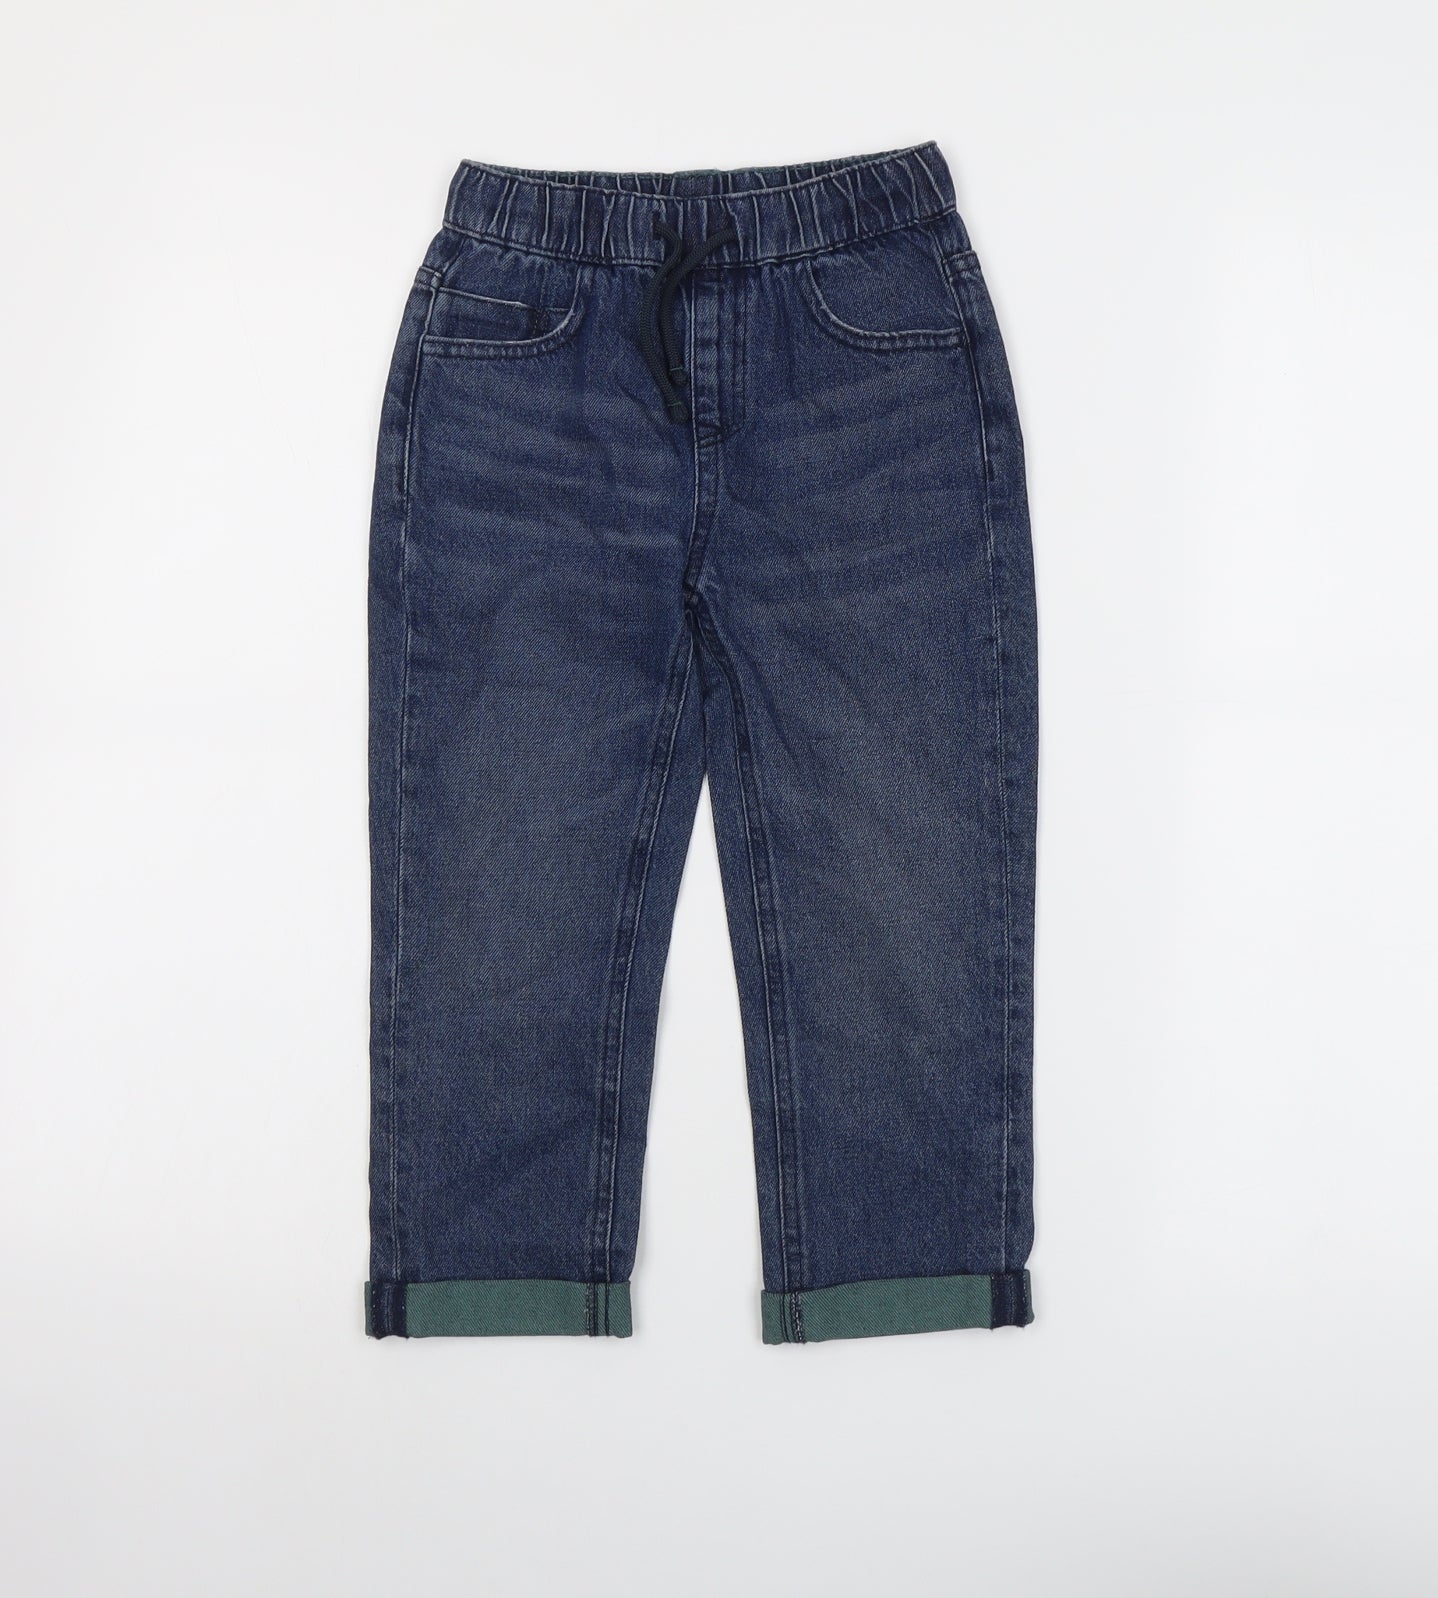 Marks and Spencer Boys Blue Cotton Straight Jeans Size 4-5 Years Regular Drawstring